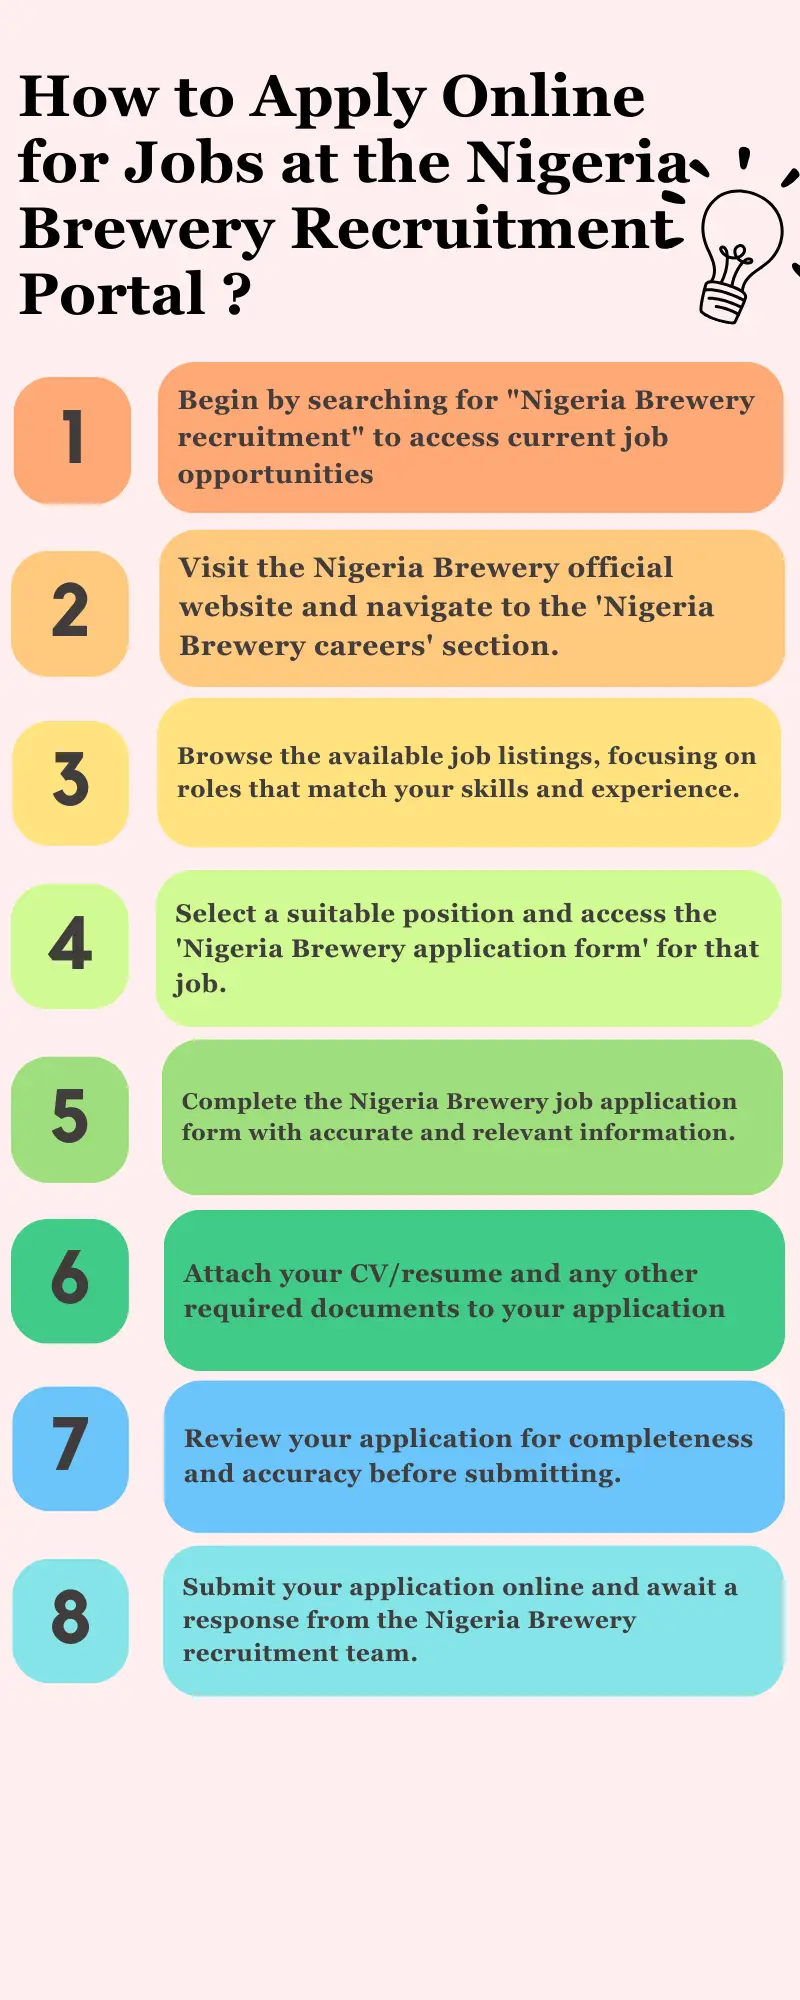 How to Apply Online for Jobs at the Nigeria Brewery Recruitment Portal ?